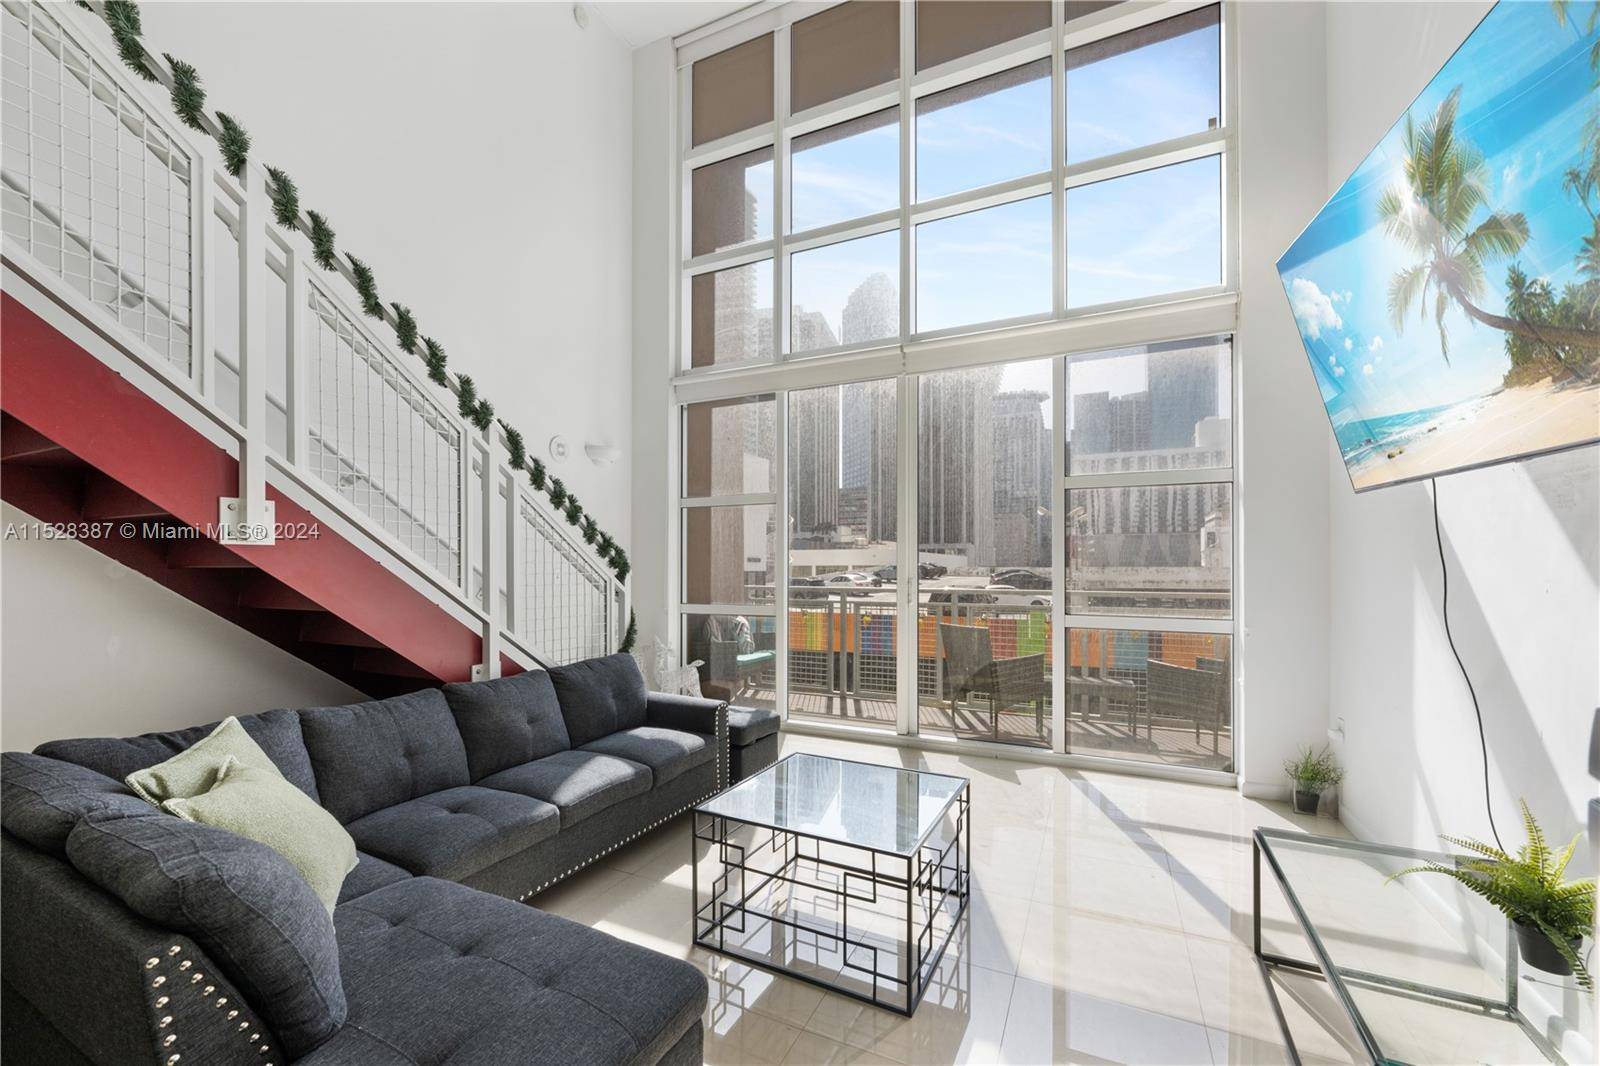 Exceptional two story urban loft with balcony, offering city views.